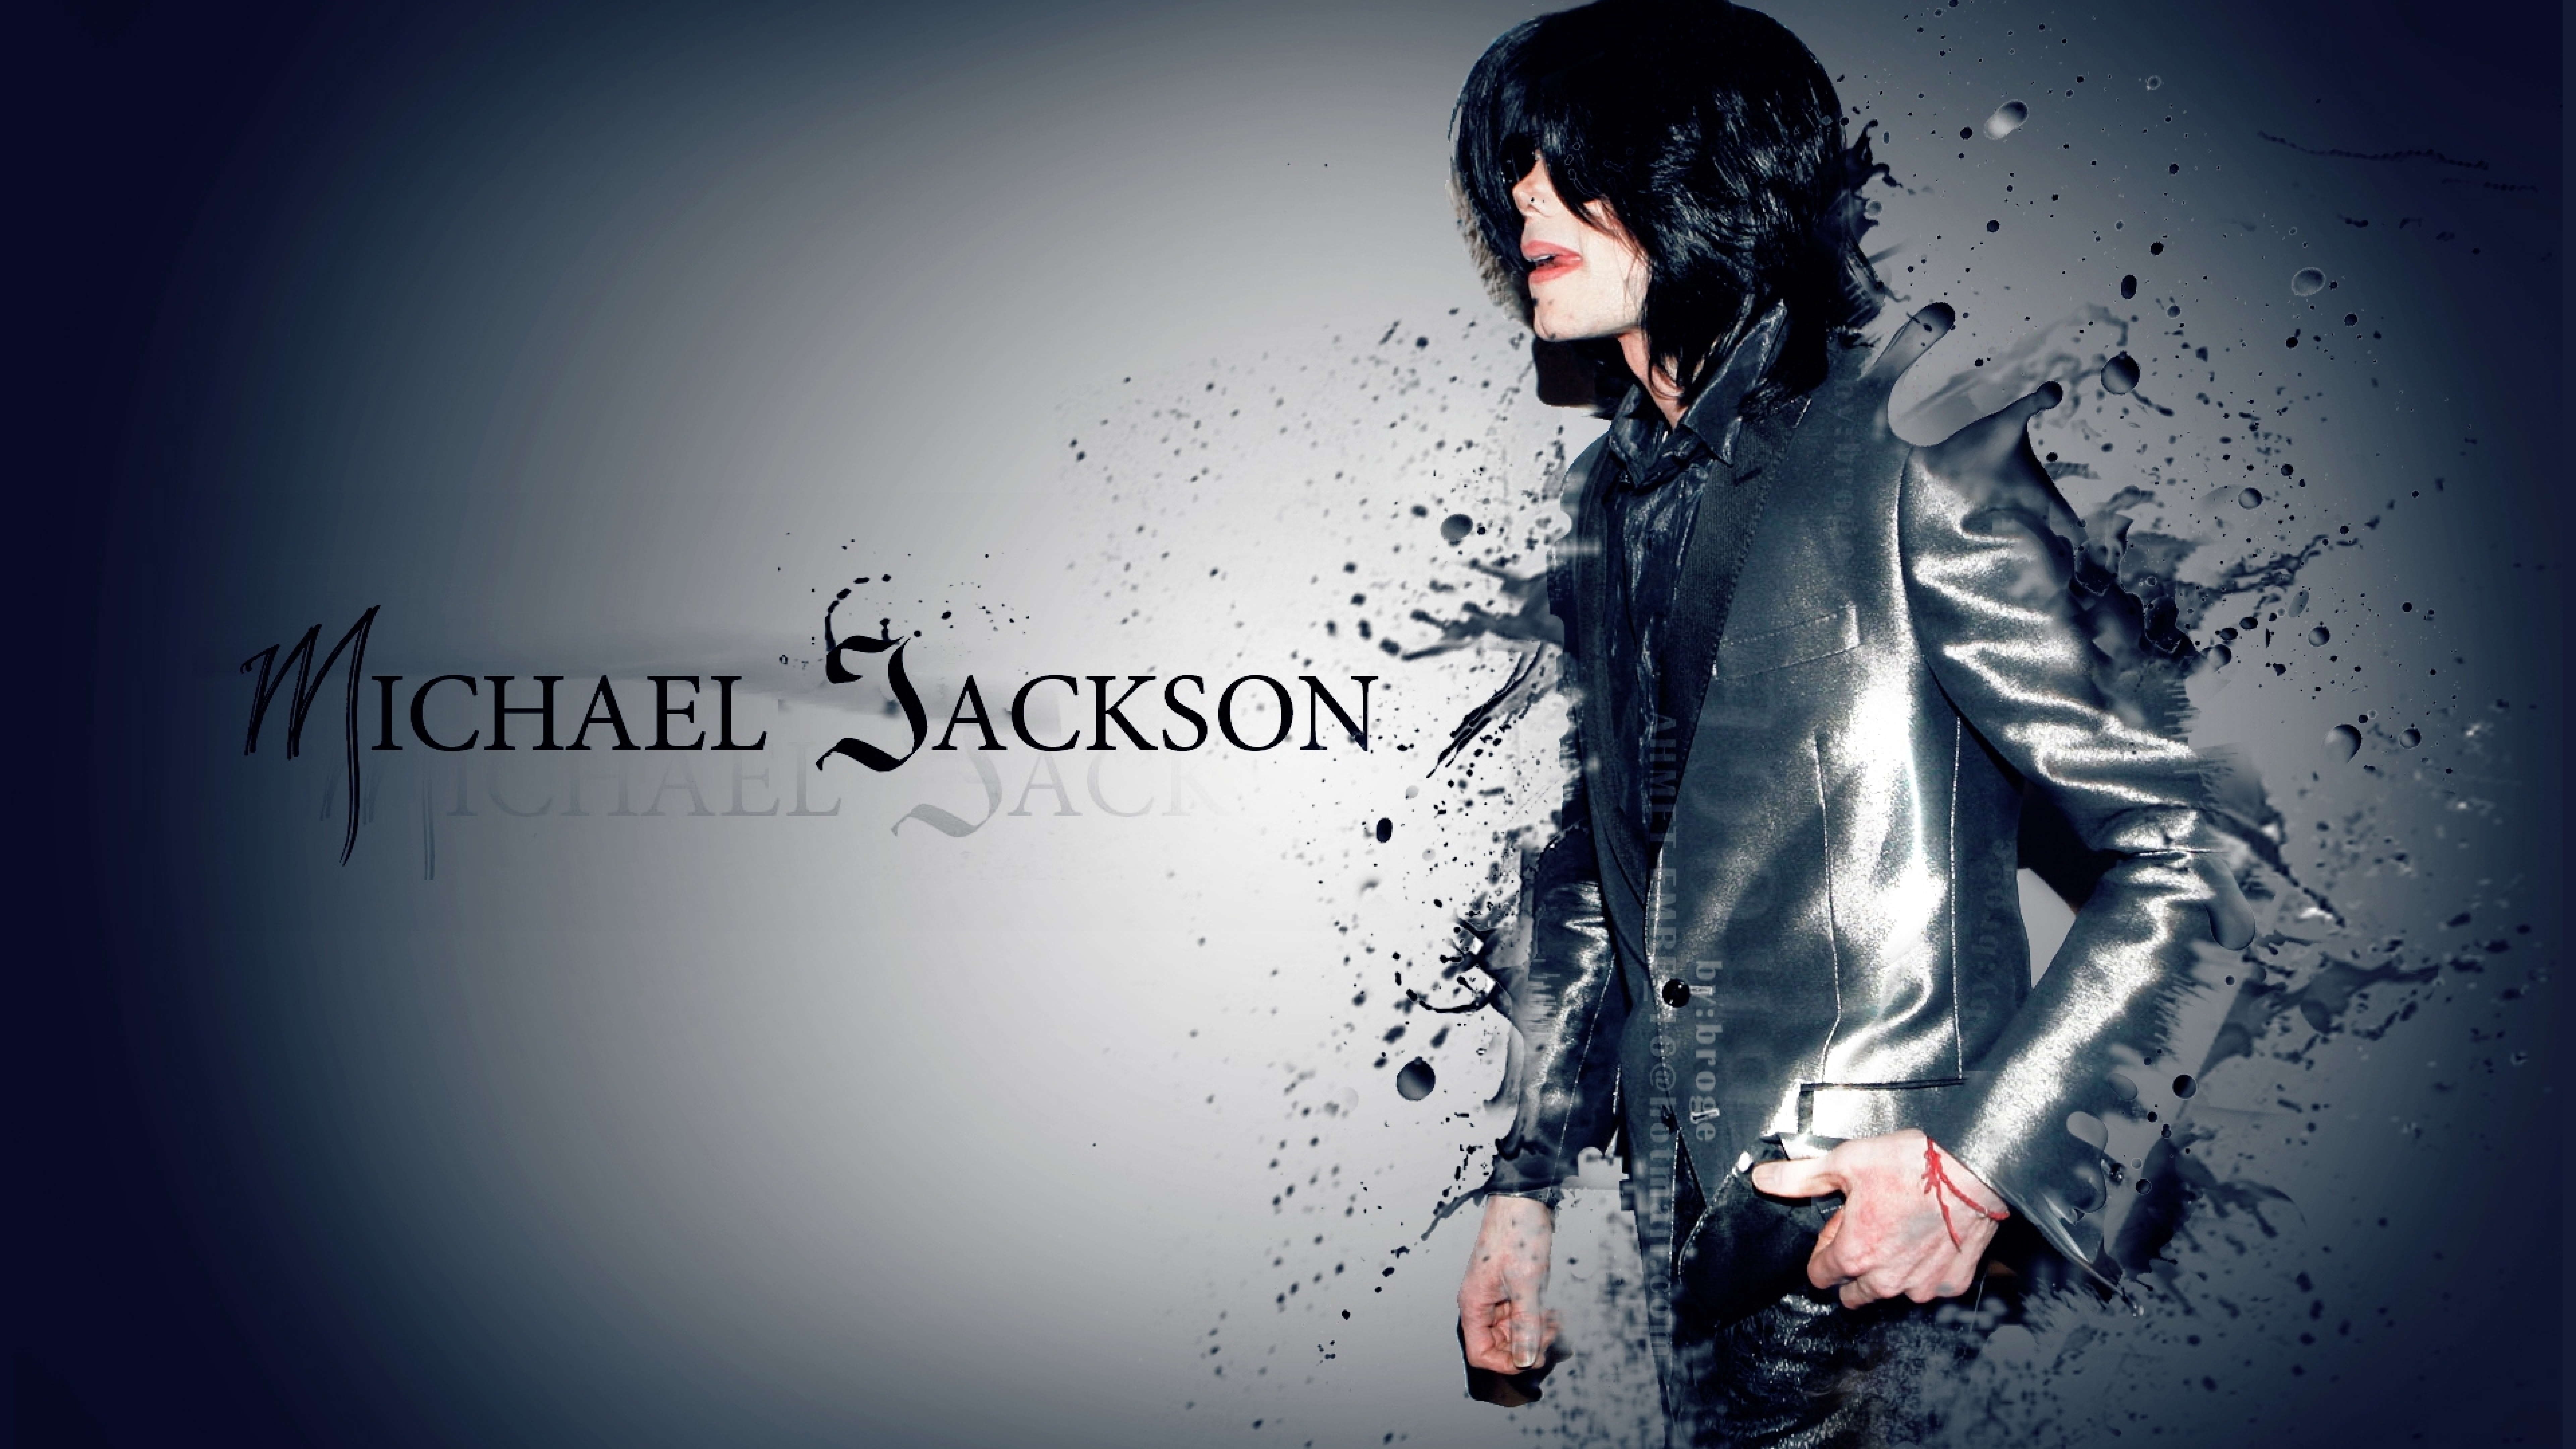 7680x43 Michael Jackson Glamorous Wallpapers 8k Wallpaper Hd Celebrities 4k Wallpapers Images Photos And Background